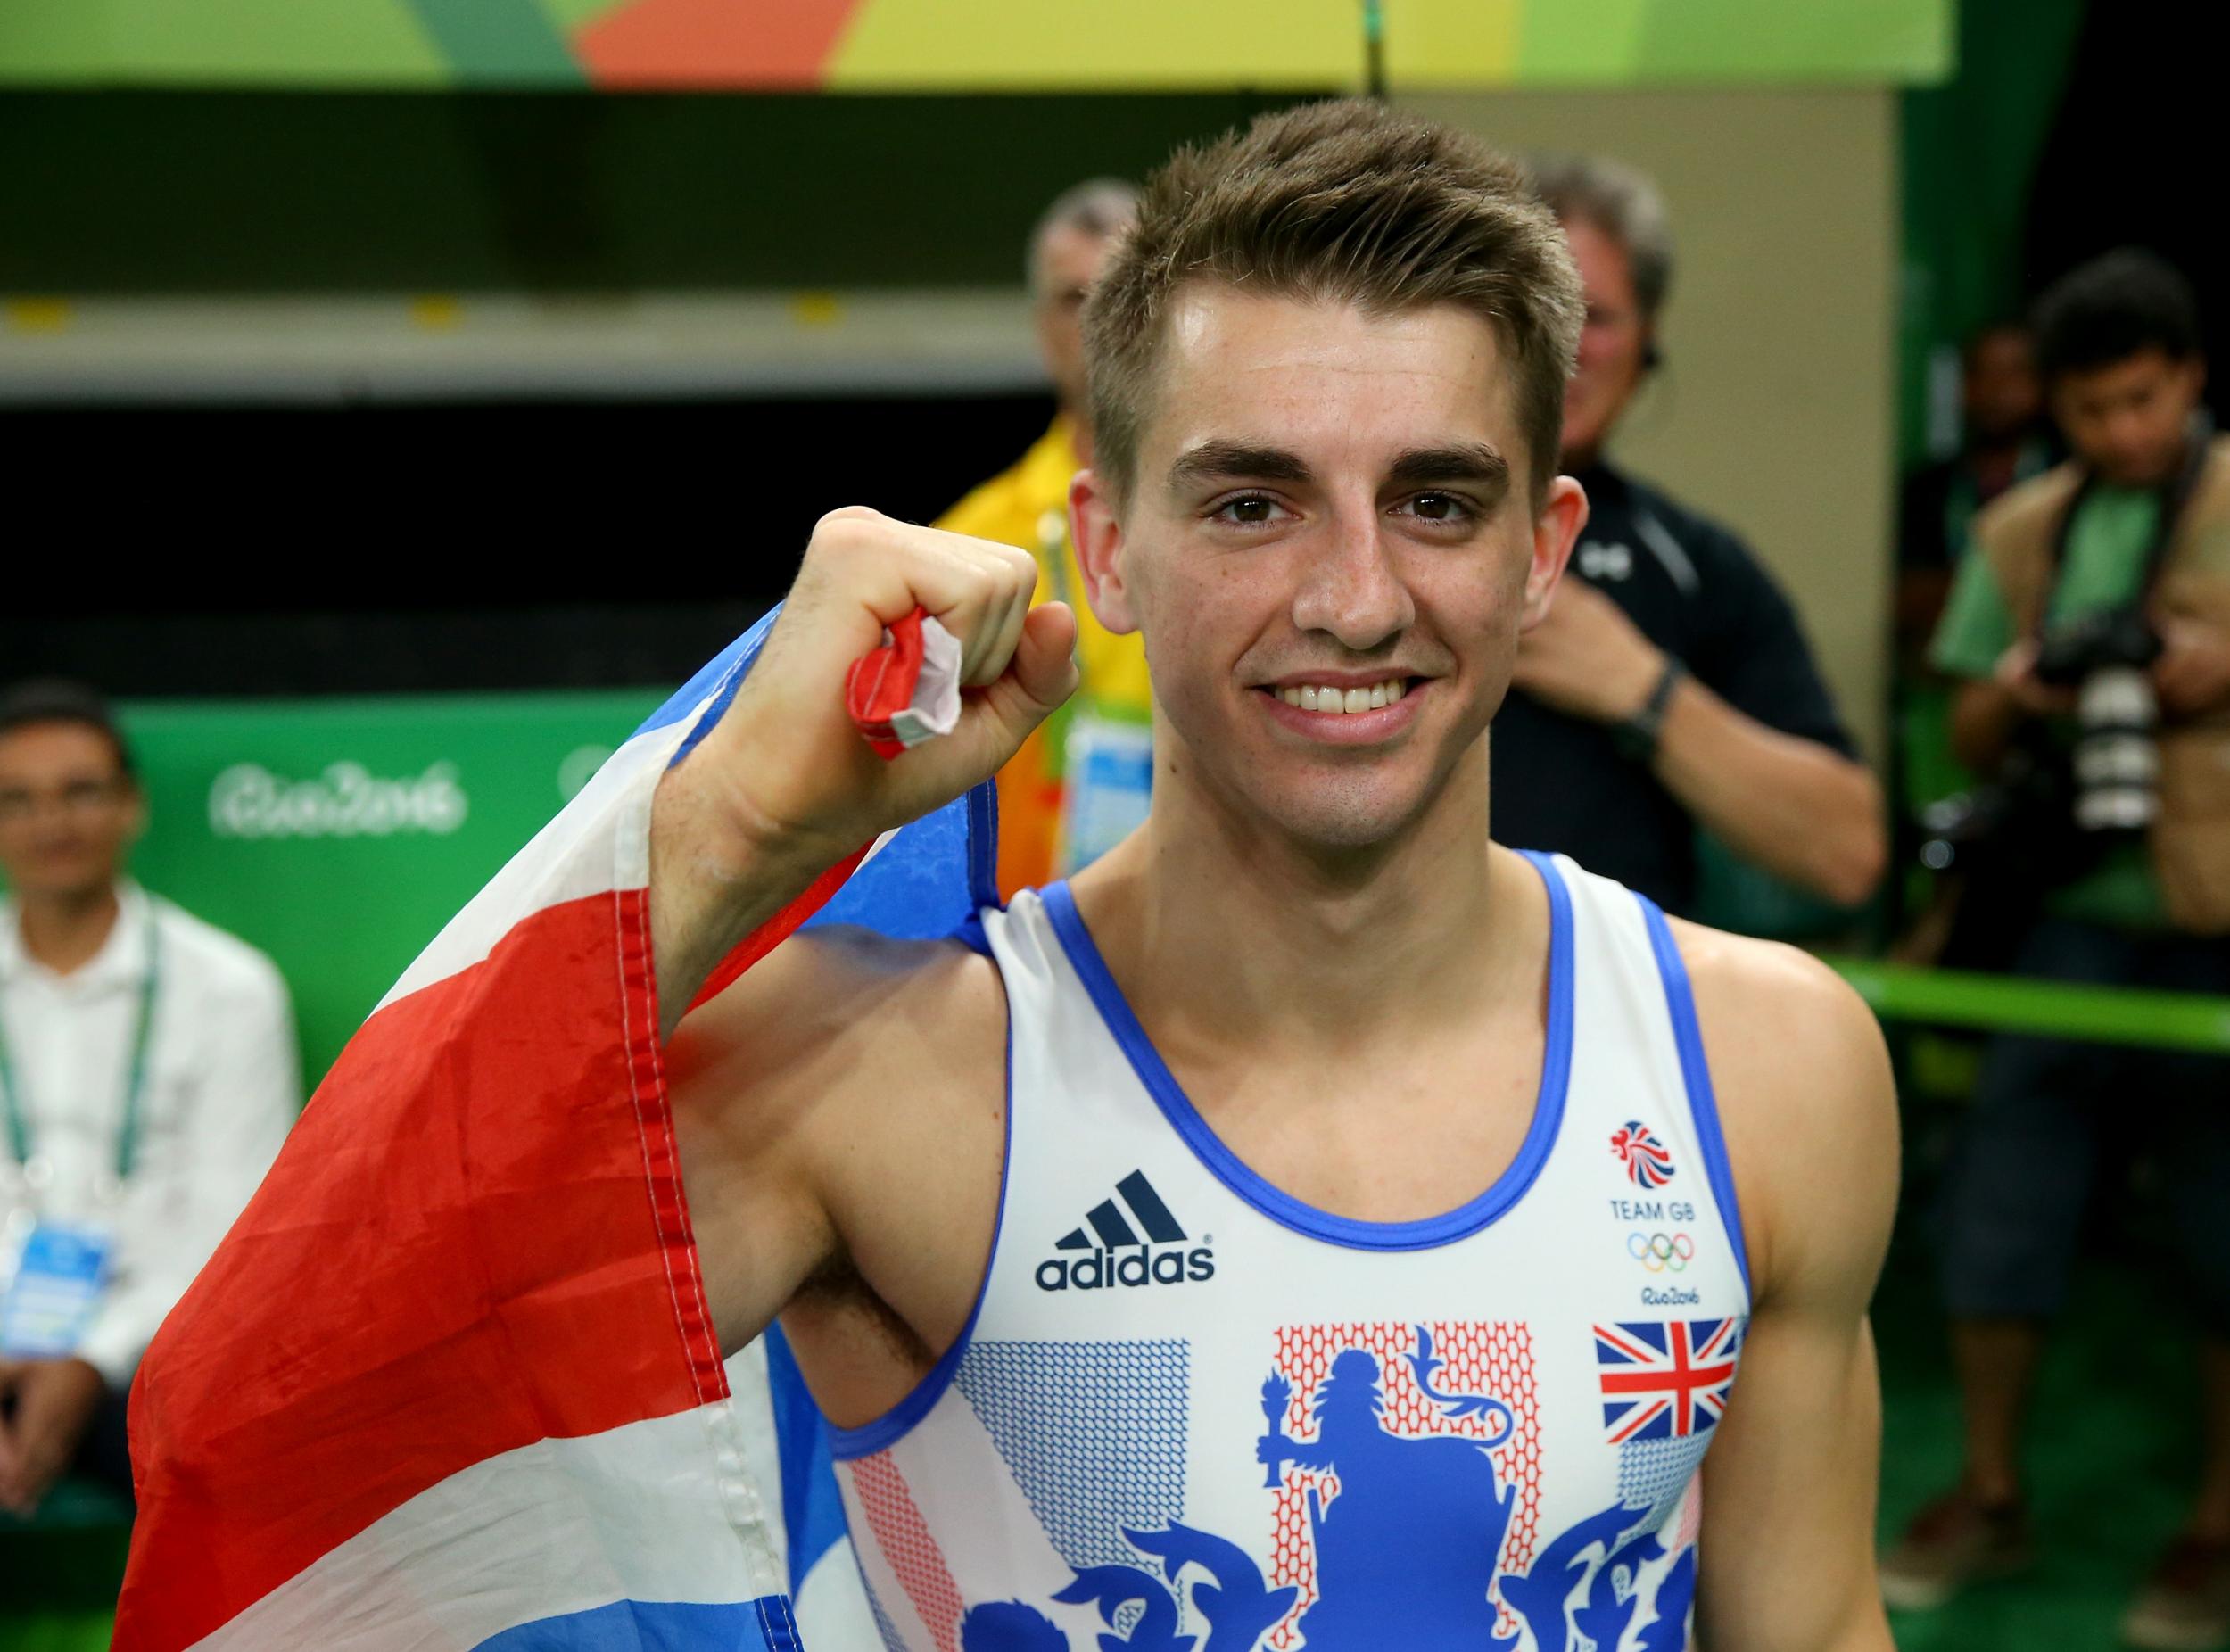 Max Whitlock of Team GB